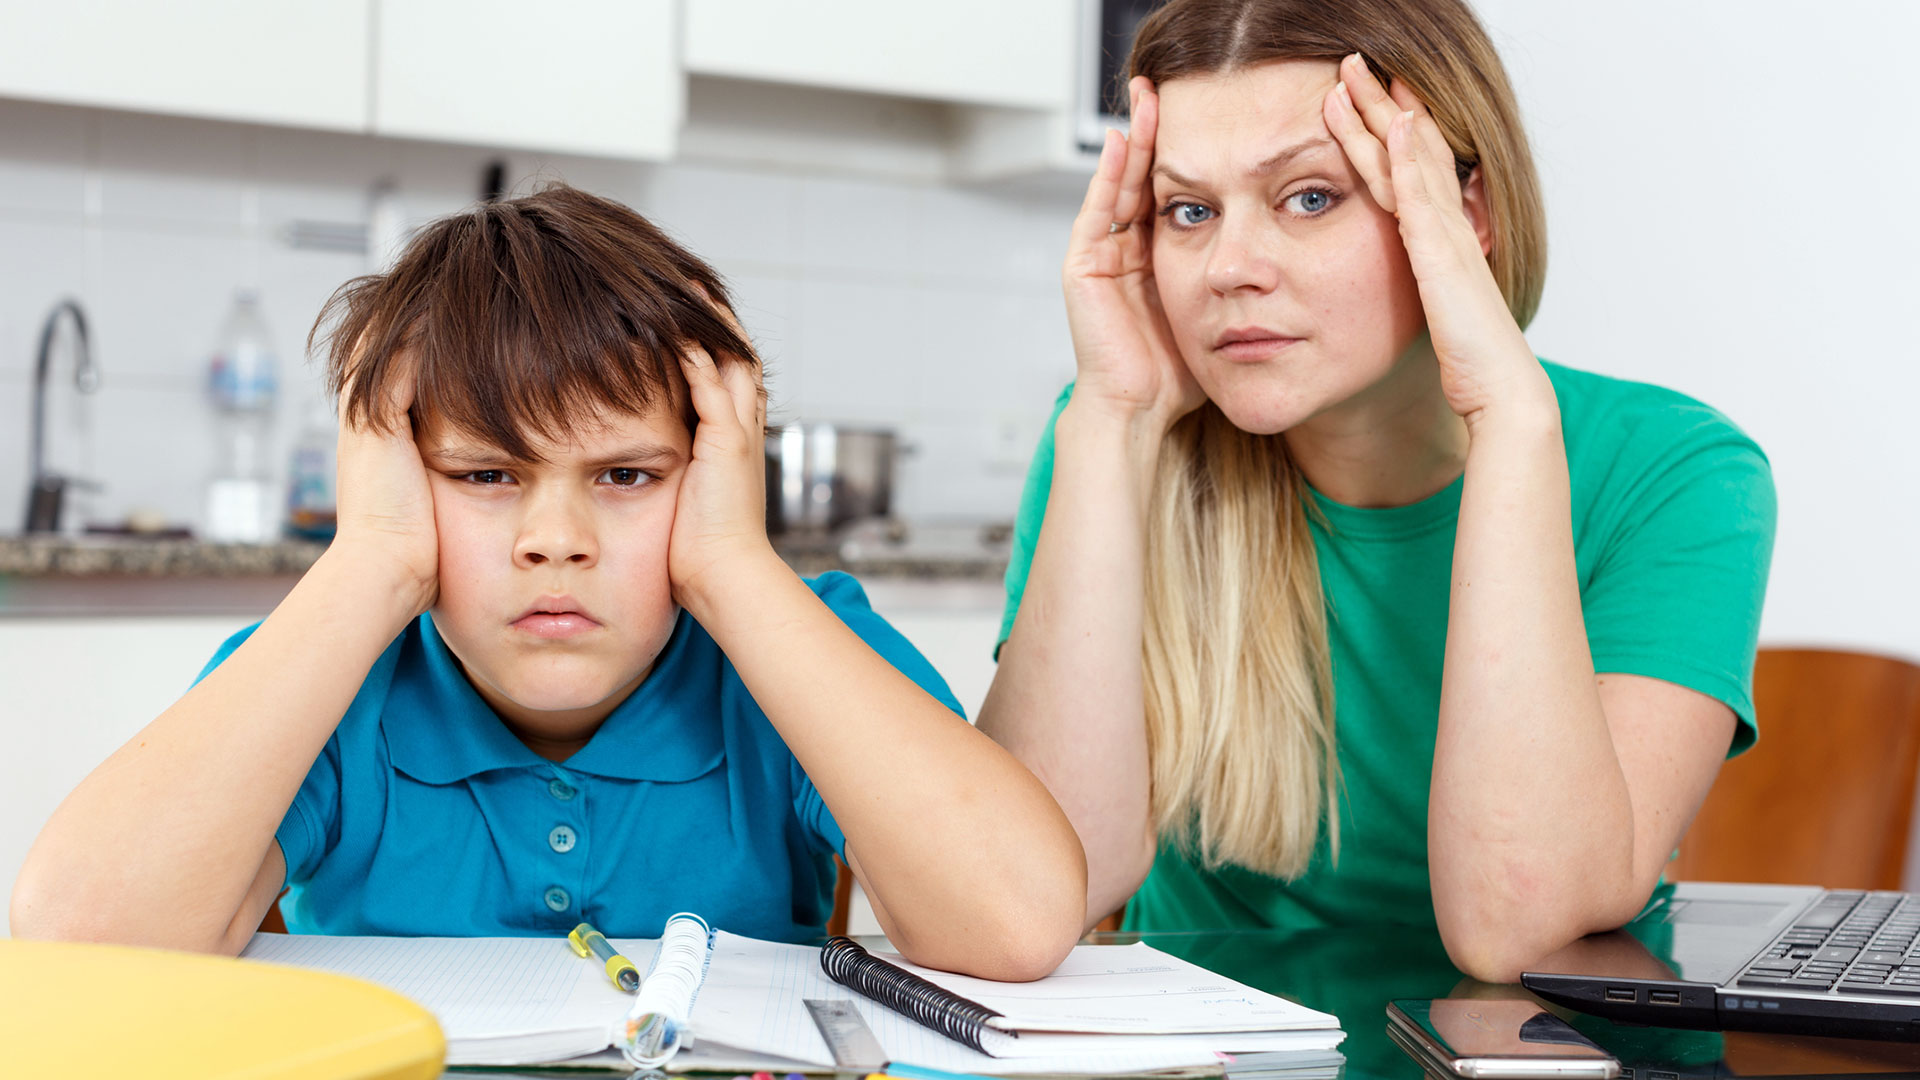 A mom and her son look fed up with learning at home.